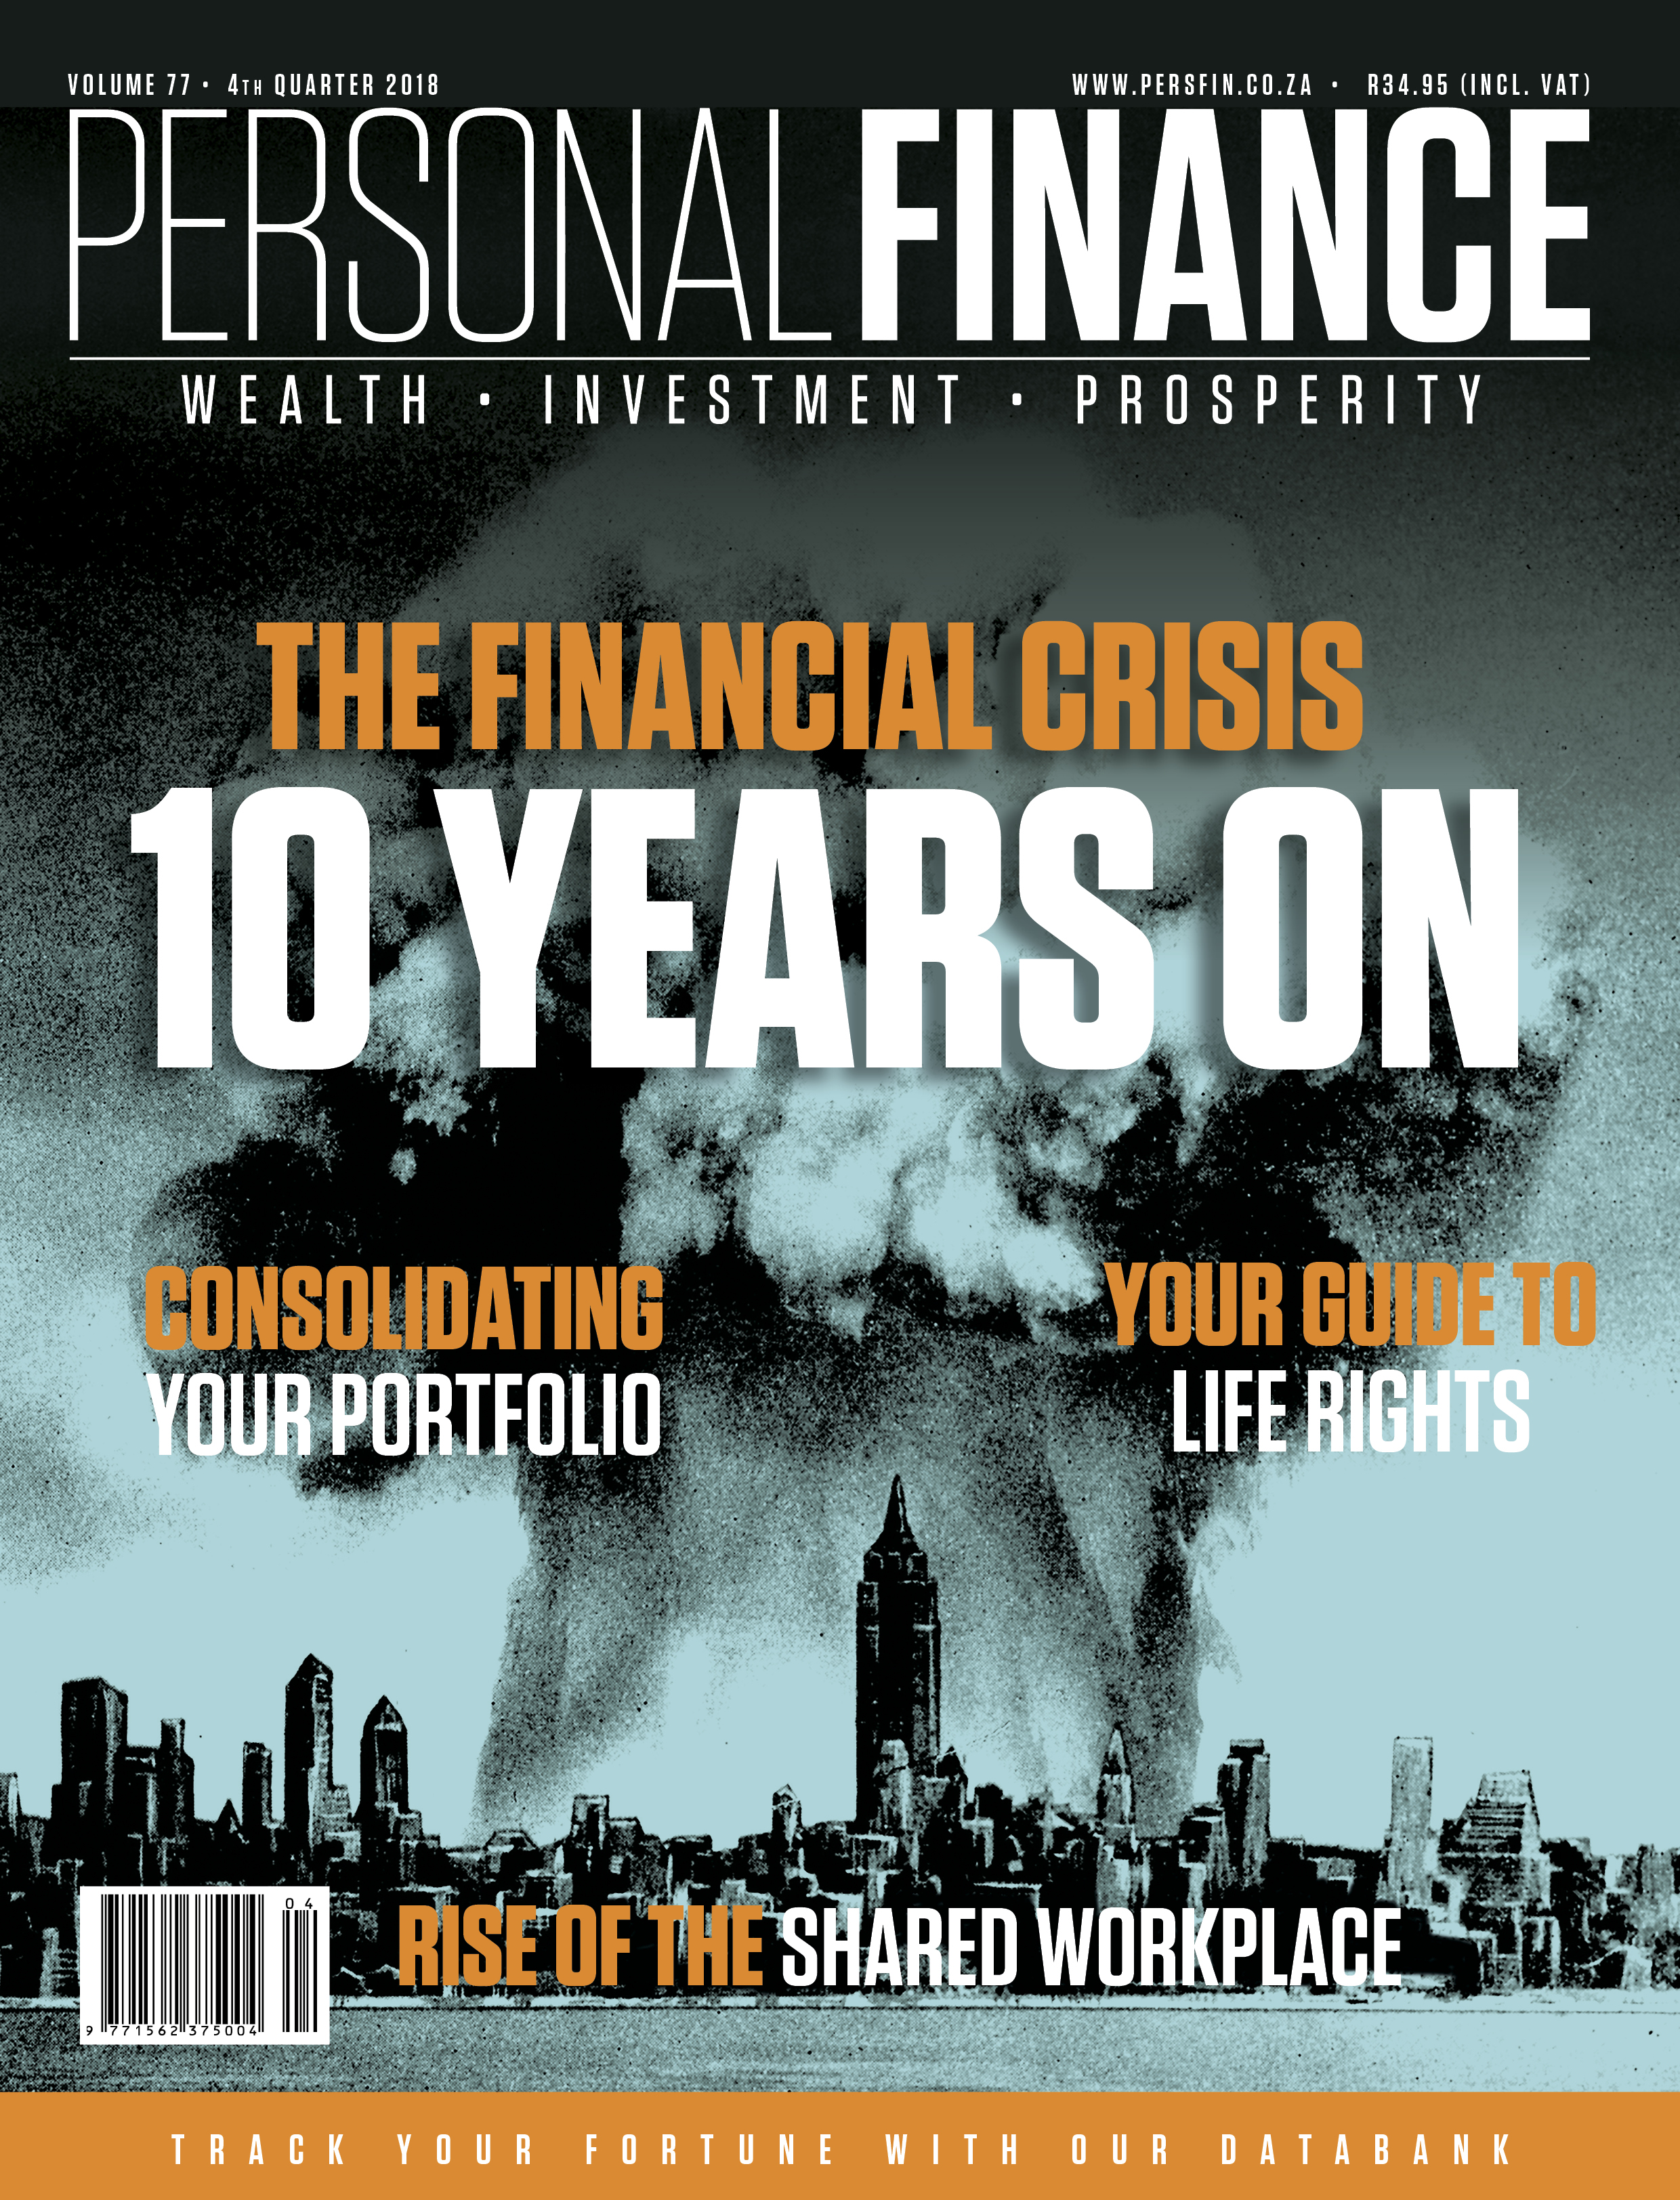 Personal Finance, cover, edition 4, 2018